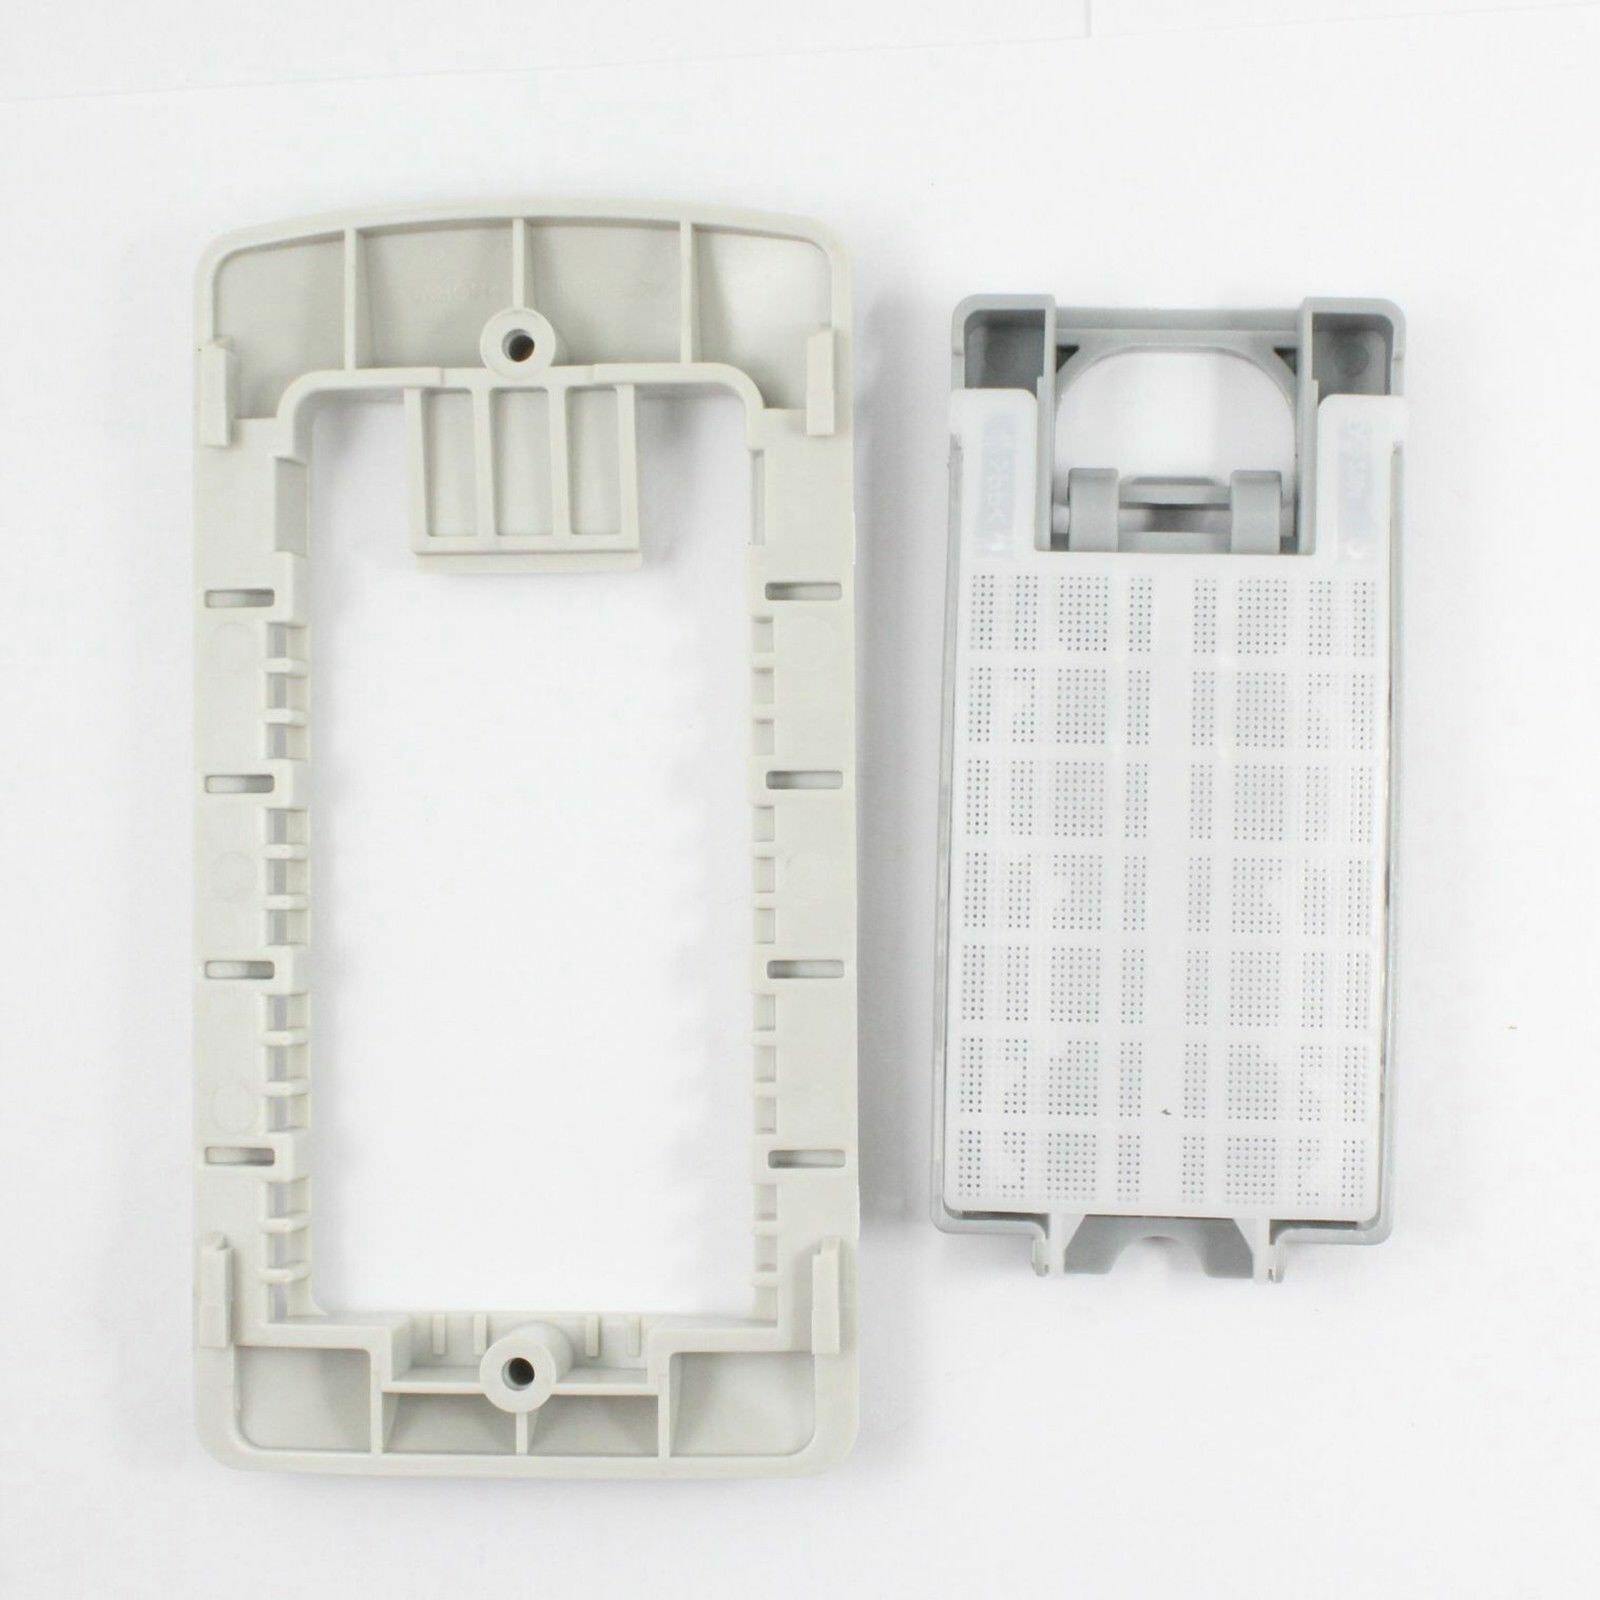 Washing Machine Lint Filter Assembly For LG 5230EA2006A WT-H9556 WT-H950 Sparesbarn